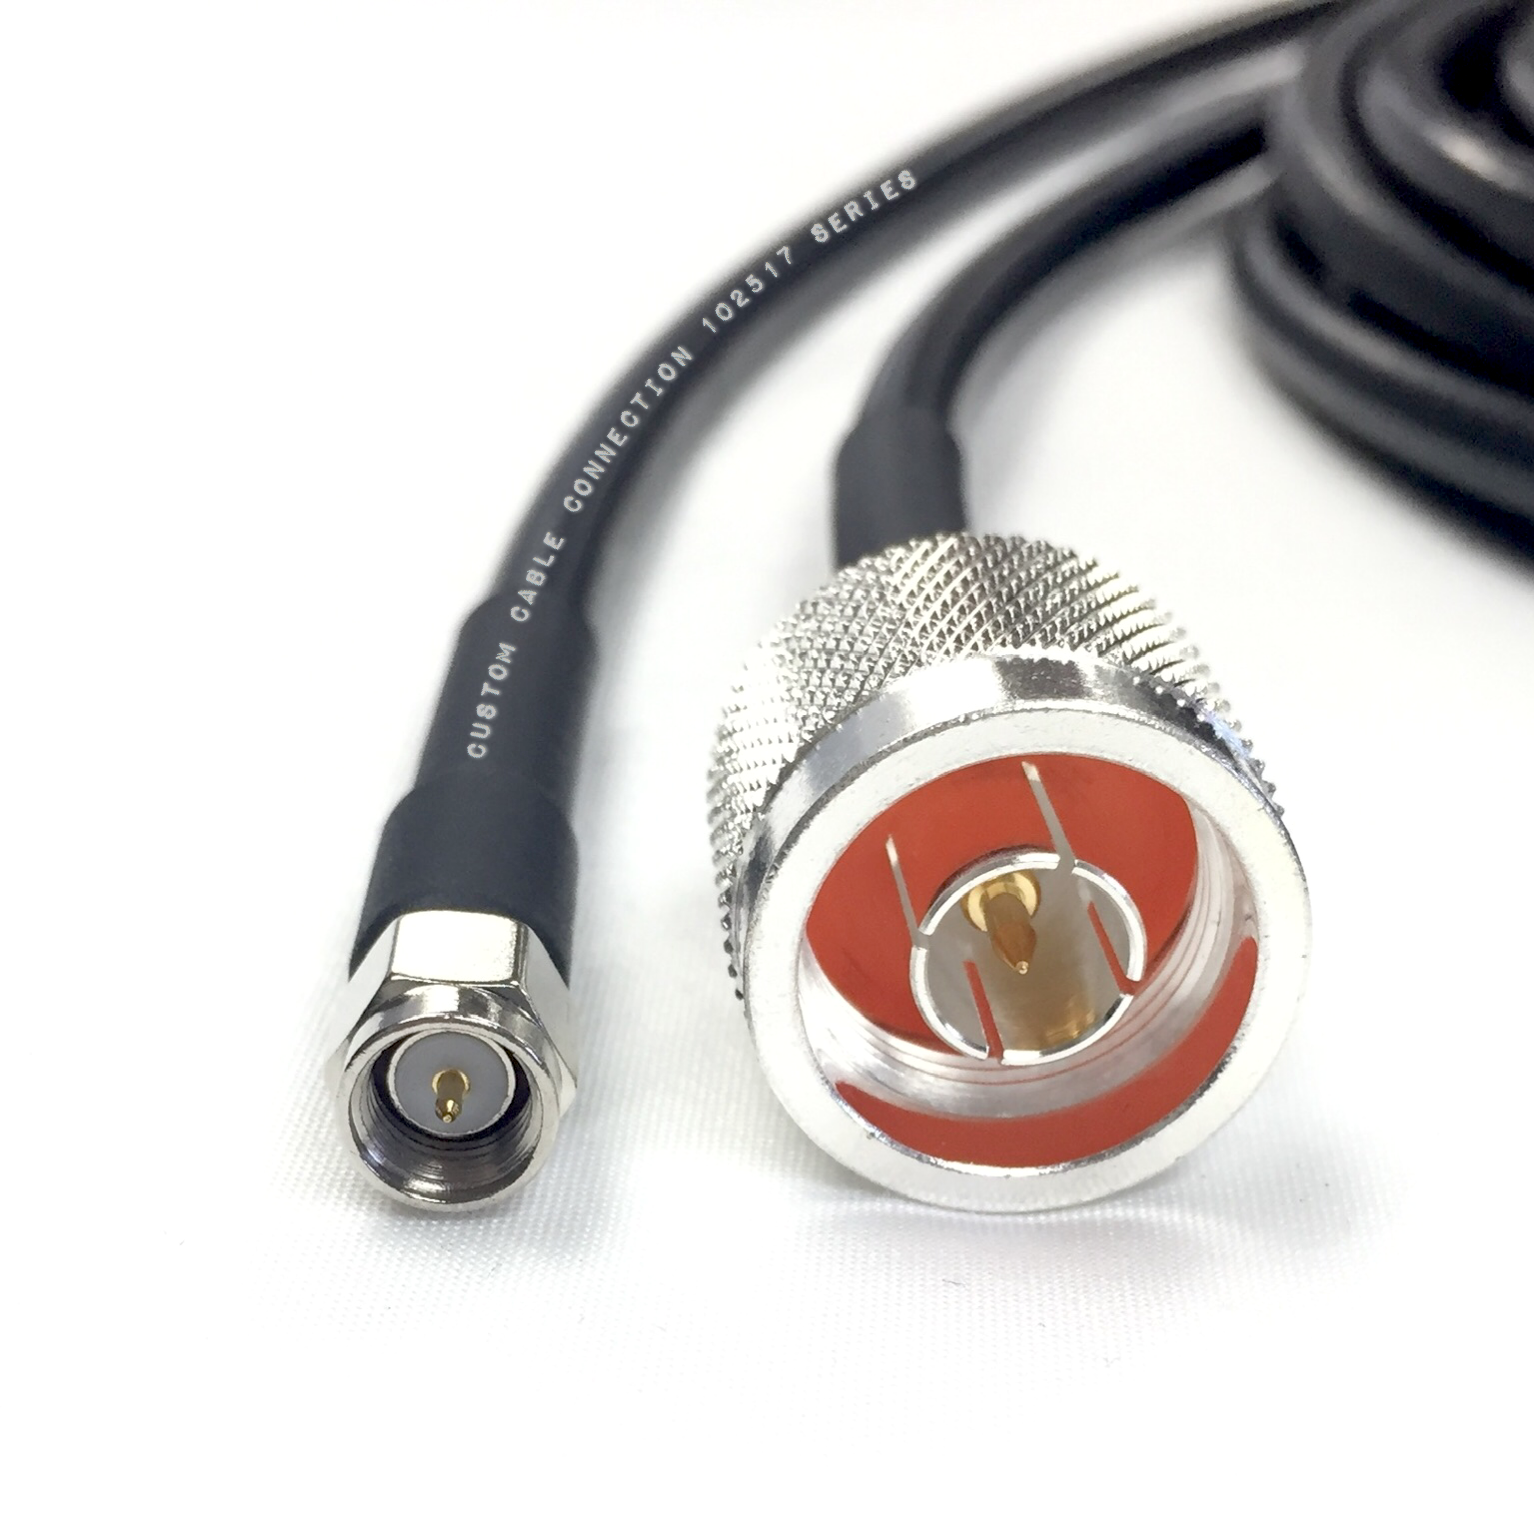 N Male to N Male Cable Assembly with RG401 Cable